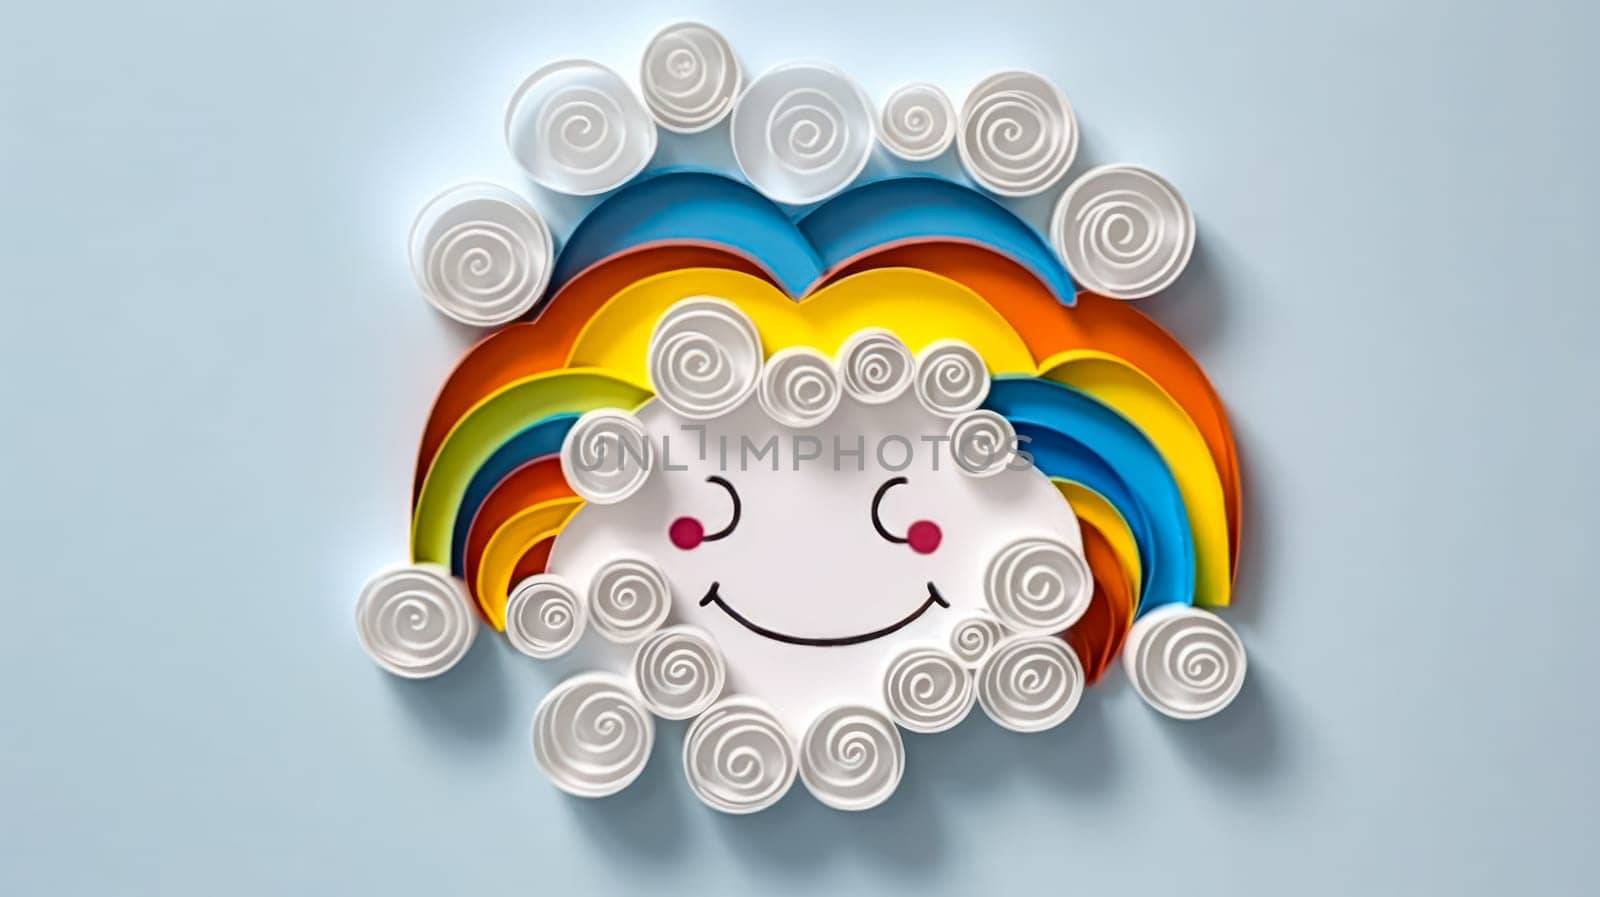 A stunning quilling style depiction of a cloud adorned with a vibrant rainbow, evoking a sense of whimsy and wonder. Perfect for creative projects!